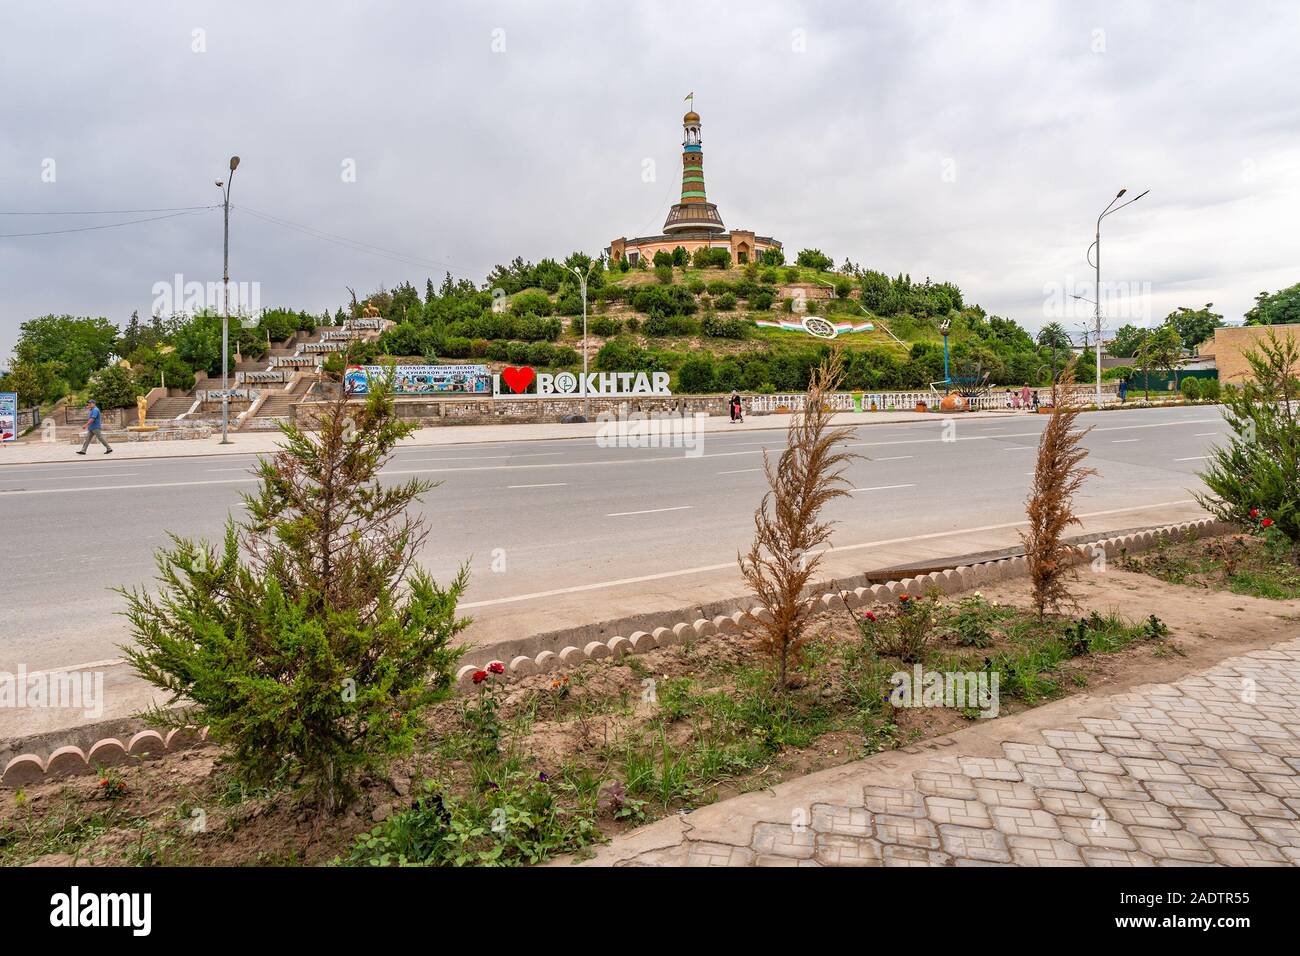 Qurghonteppa Bokhtar Bibikhonum Teppa Modern History Museum Monument Low Angle View with Waving Tajikistan Flag on a Cloudy Rainy Day Stock Photo